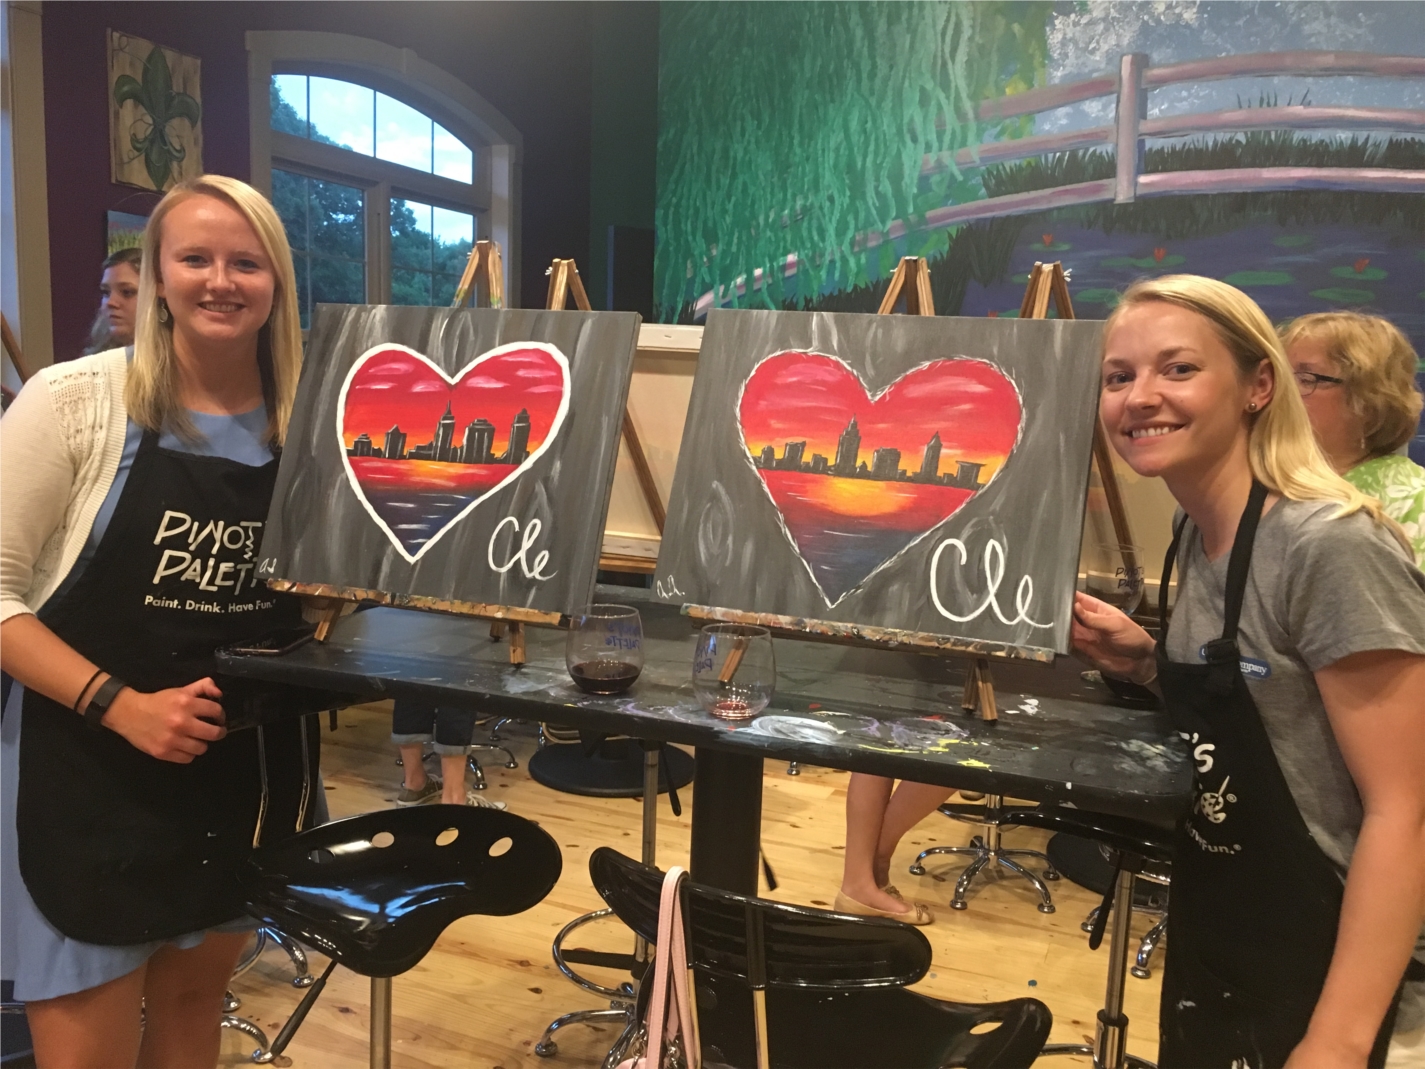 Two of our CNEW (Cohen Network of Empowered Women) participants enjoying a paint night event to network with their peers in the firm.